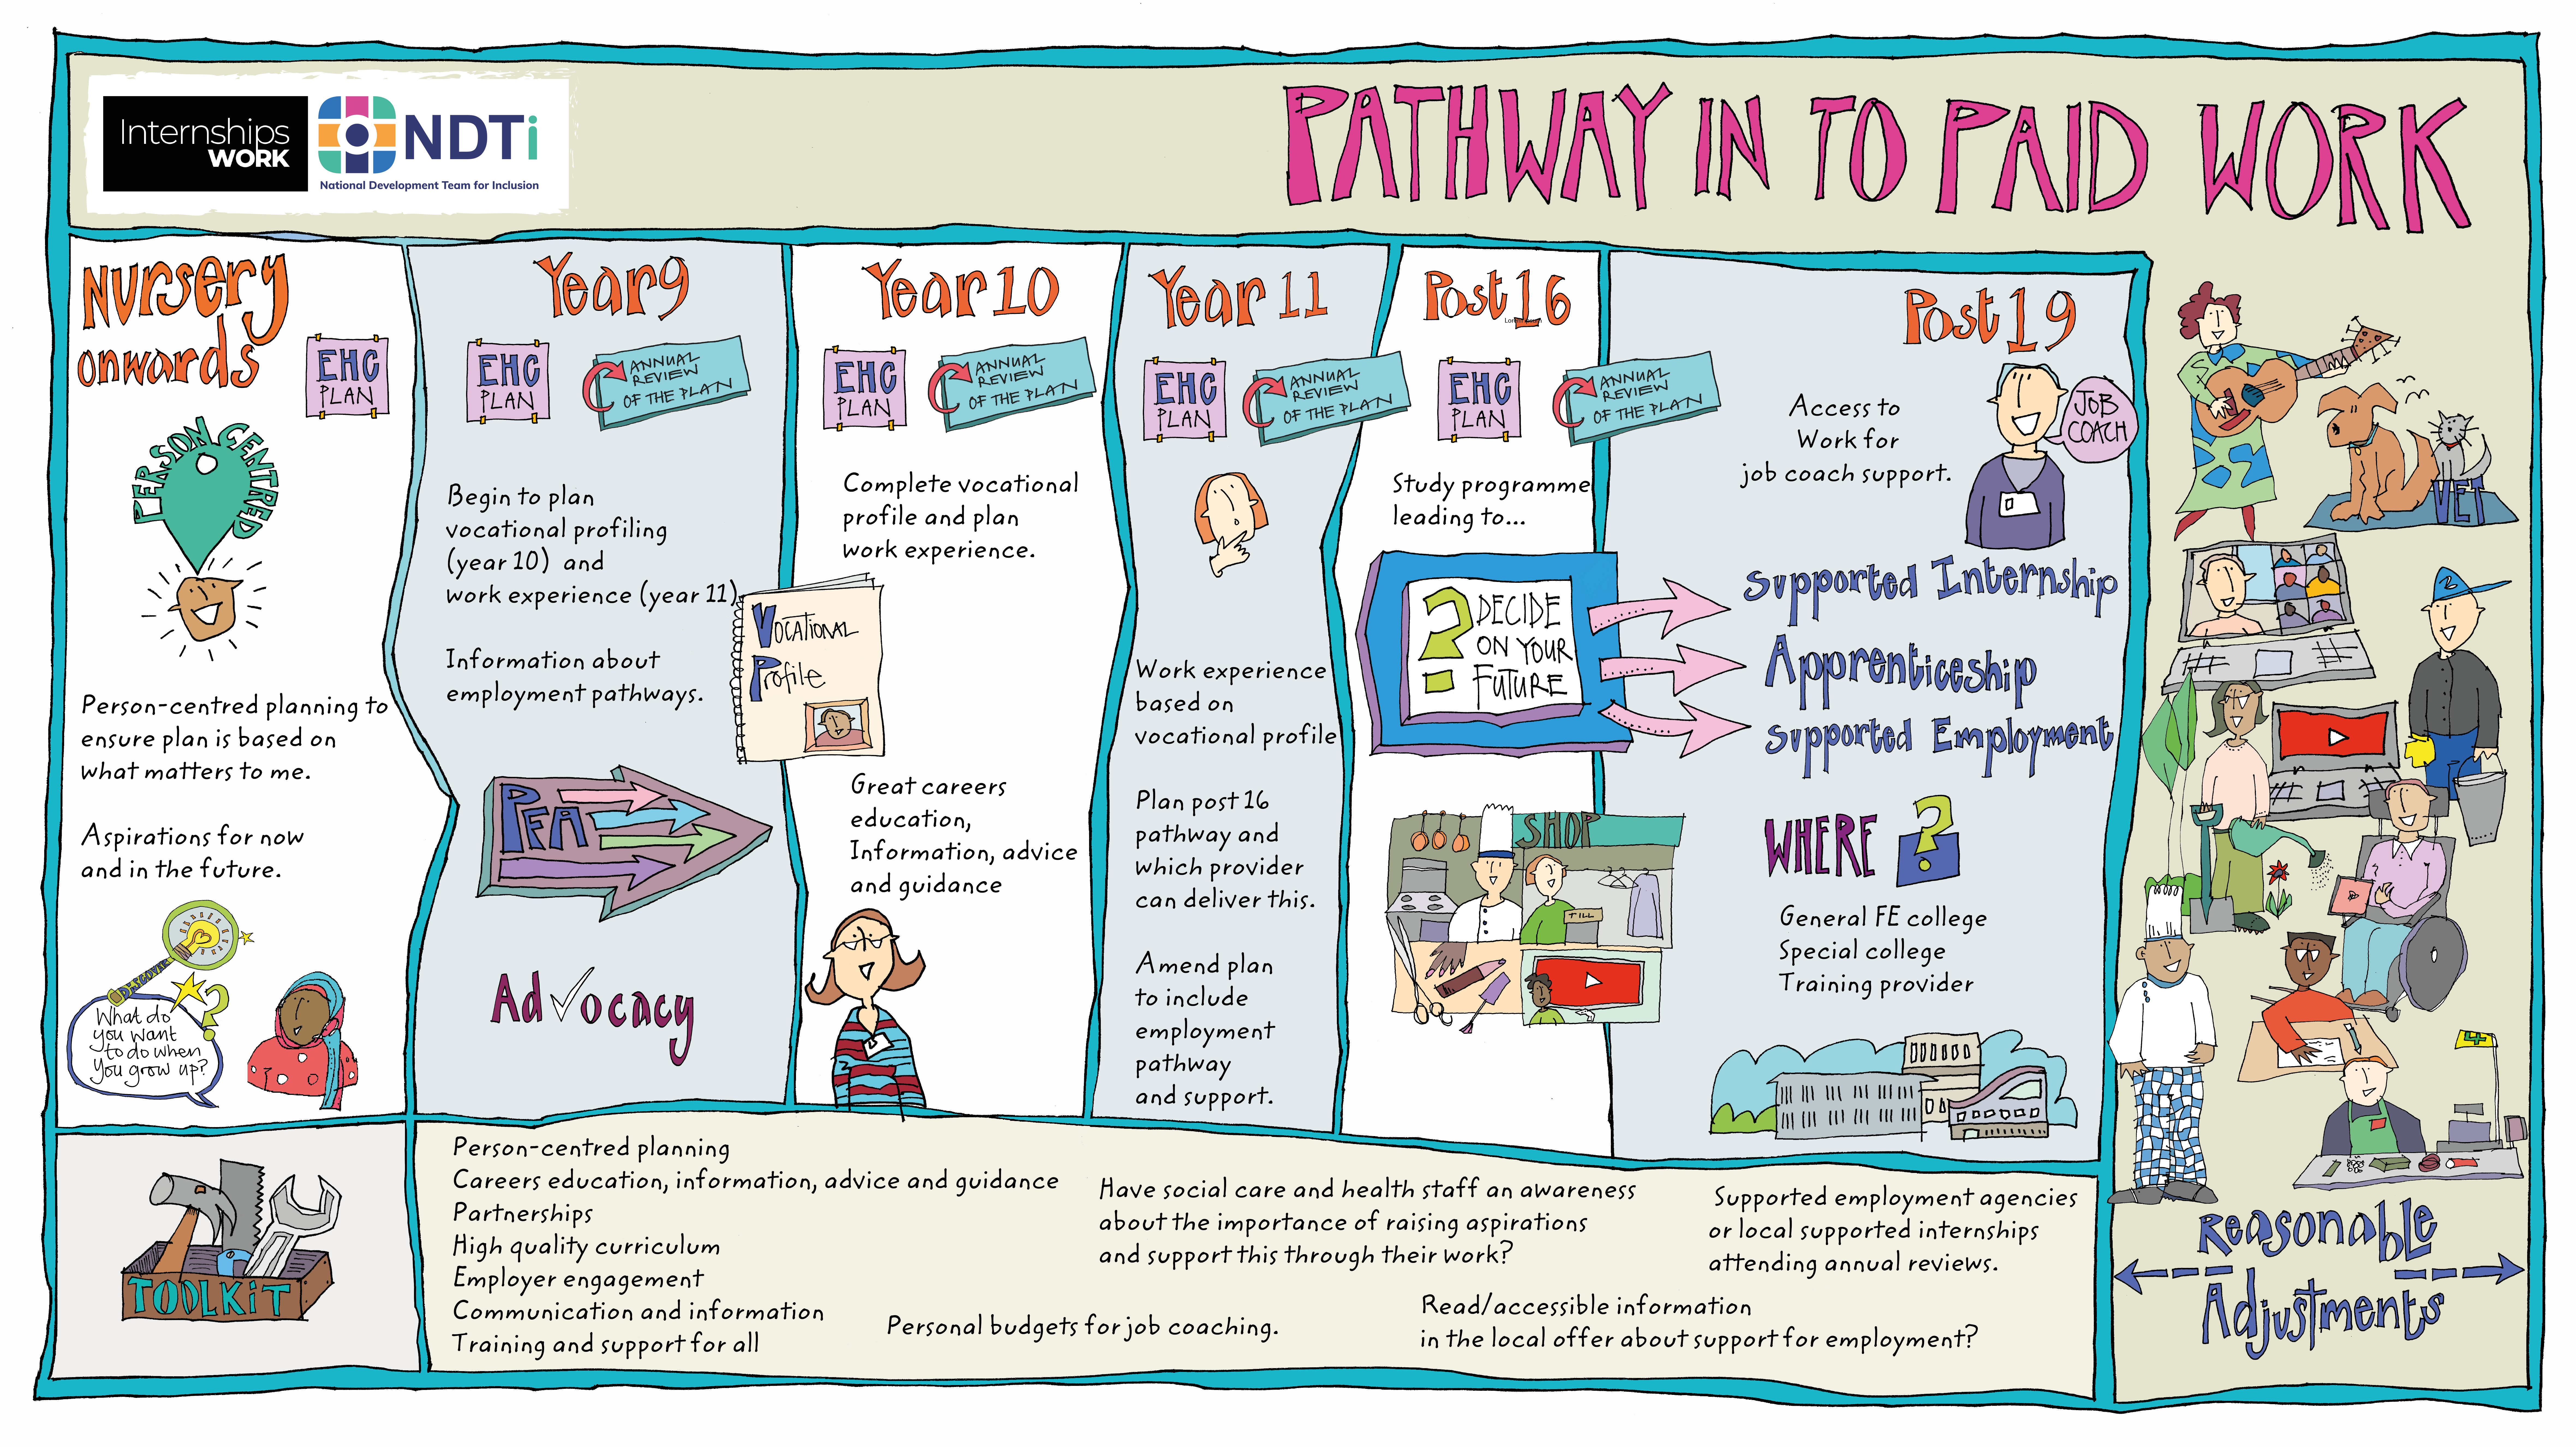 Pathway in to Paid Work Graphic